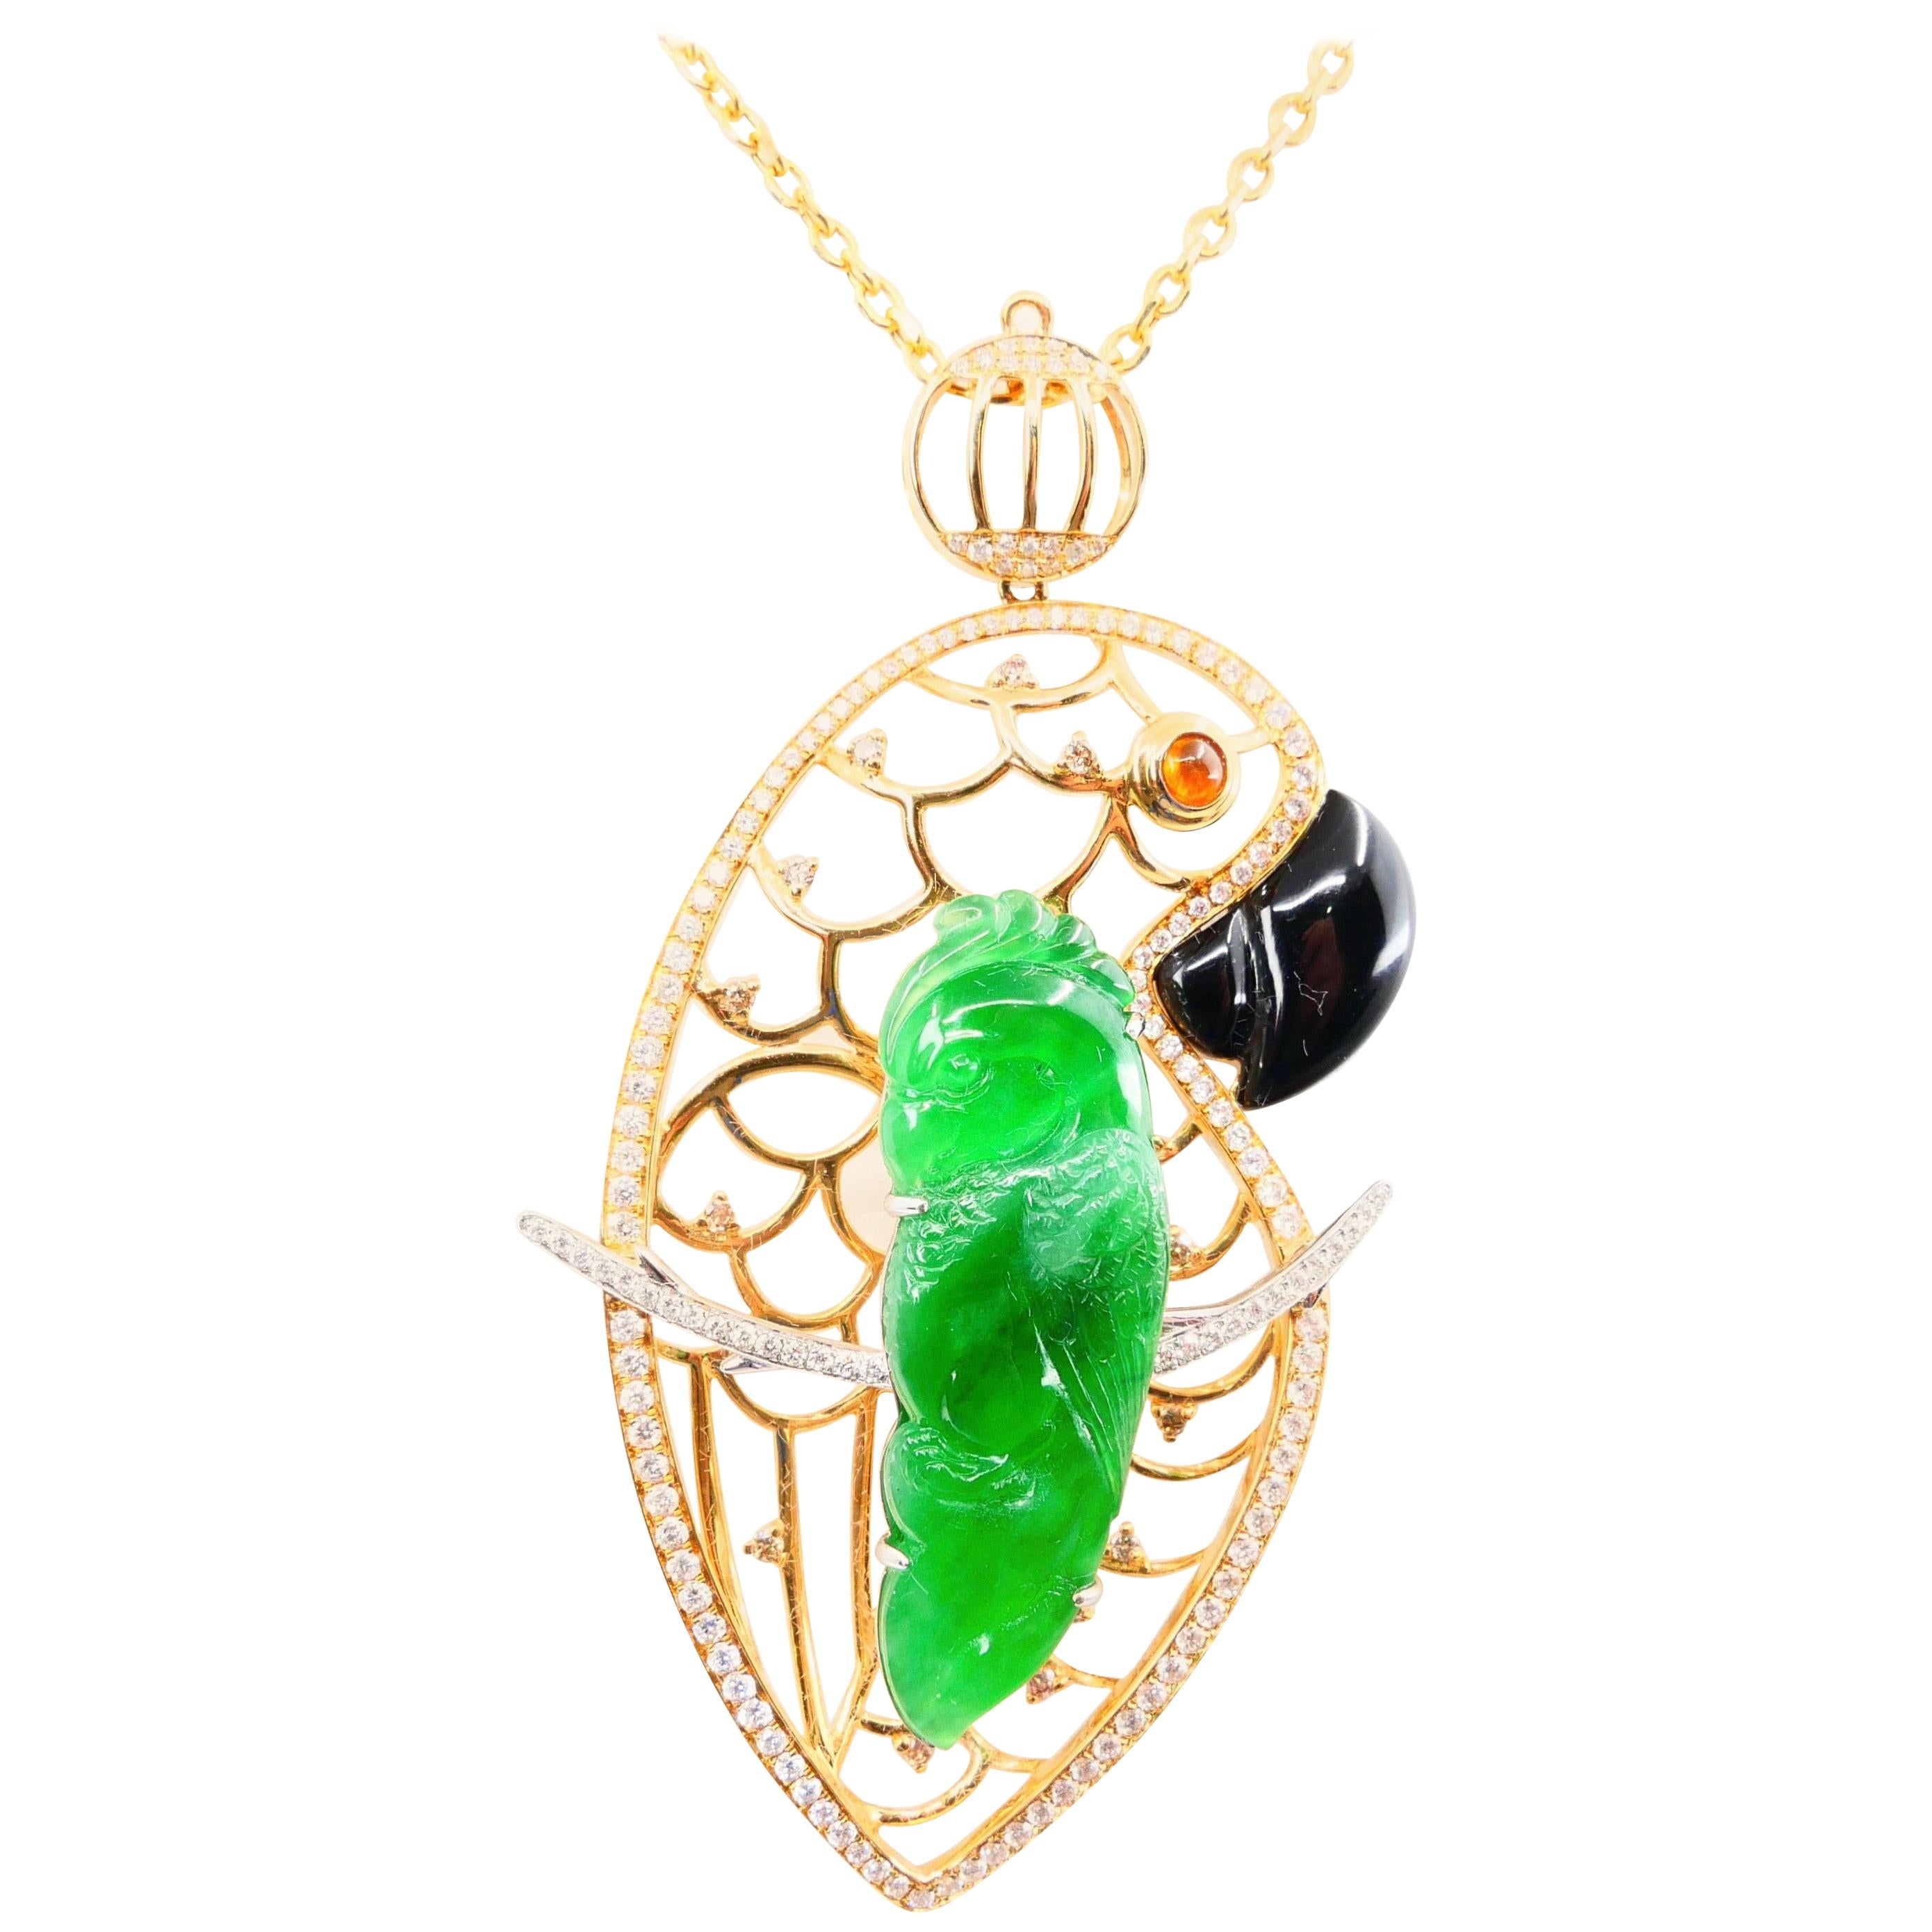 Certified Type A Jadeite Jade and Diamond Parrot Pendant, Vivid Green Color For Sale 5